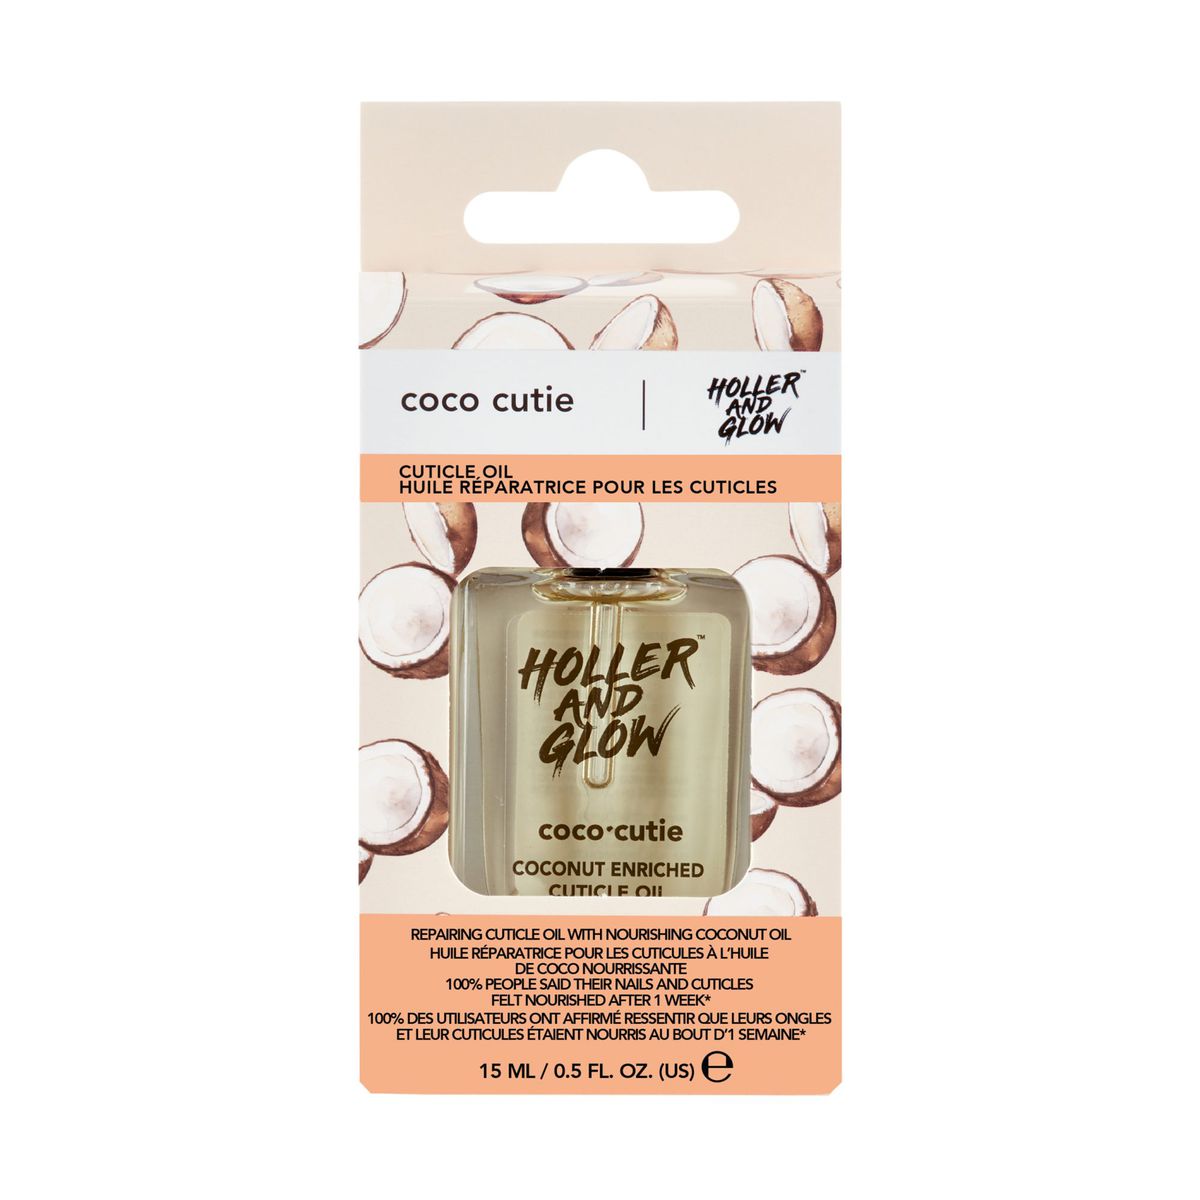 Beauty-Awards-Eyes-Nails-Holler-and-Glow-Coco-Cutie-Coconut-Enriched-Cuticle-Oil